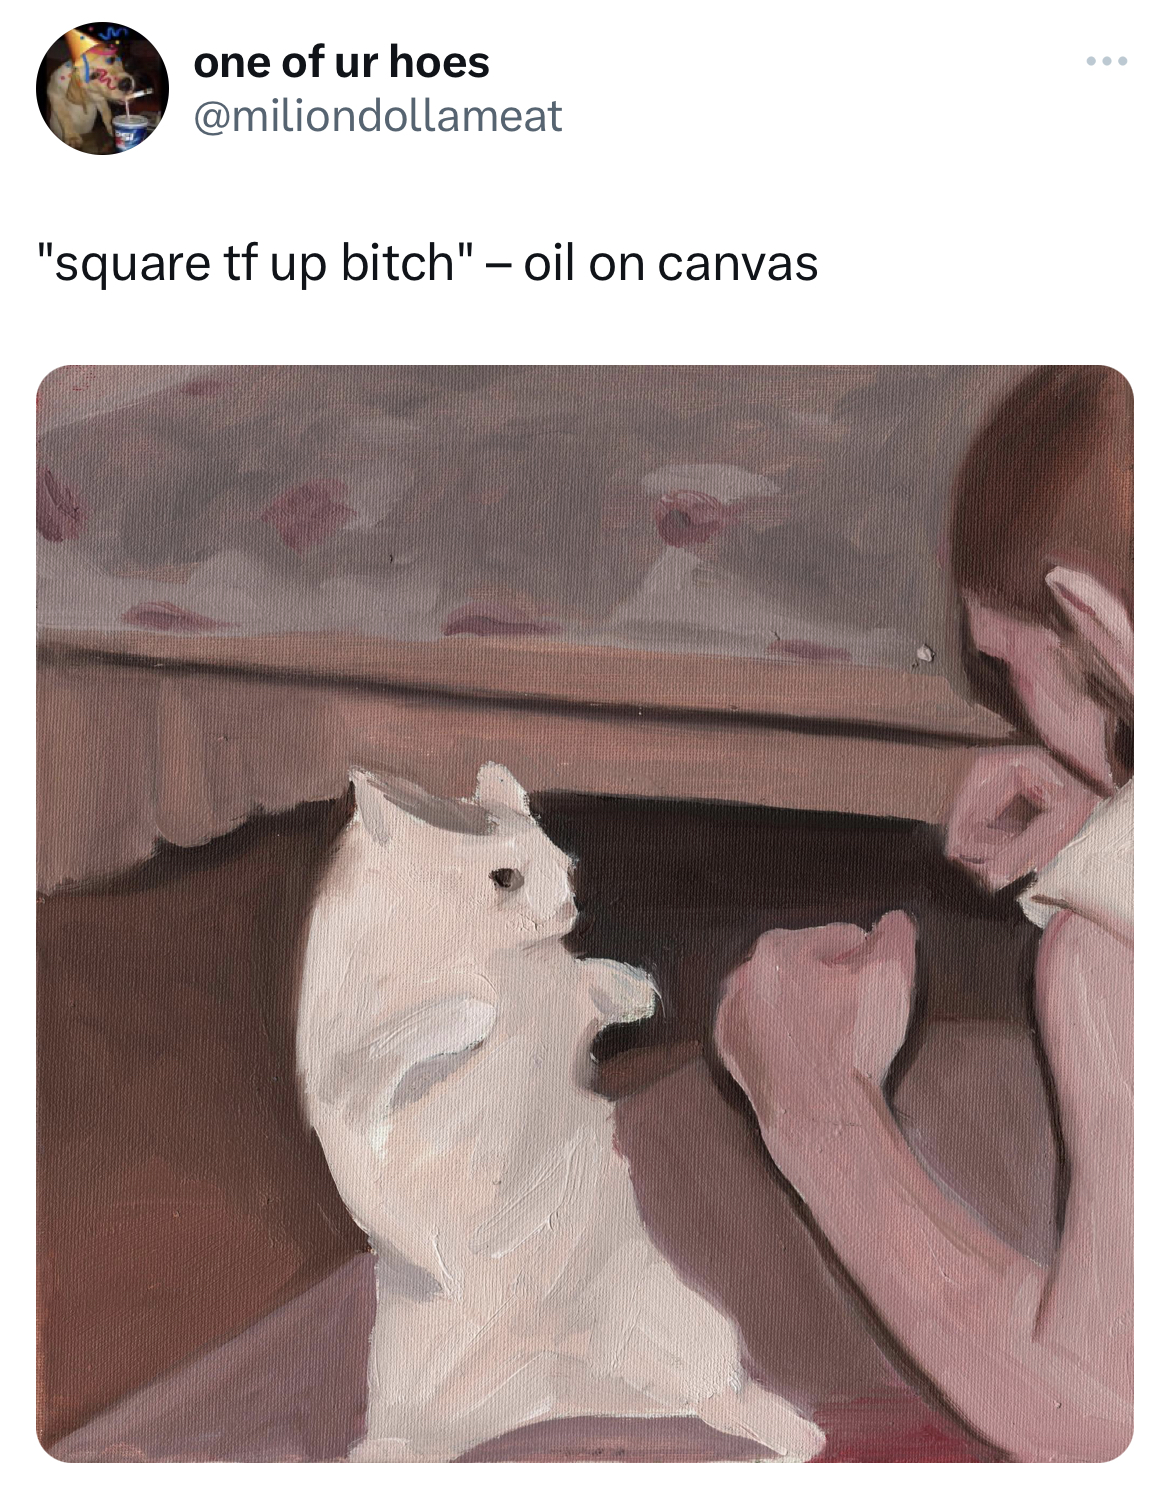 funny tweets - Art - one of ur hoes "square tf up bitch" oil on canvas www